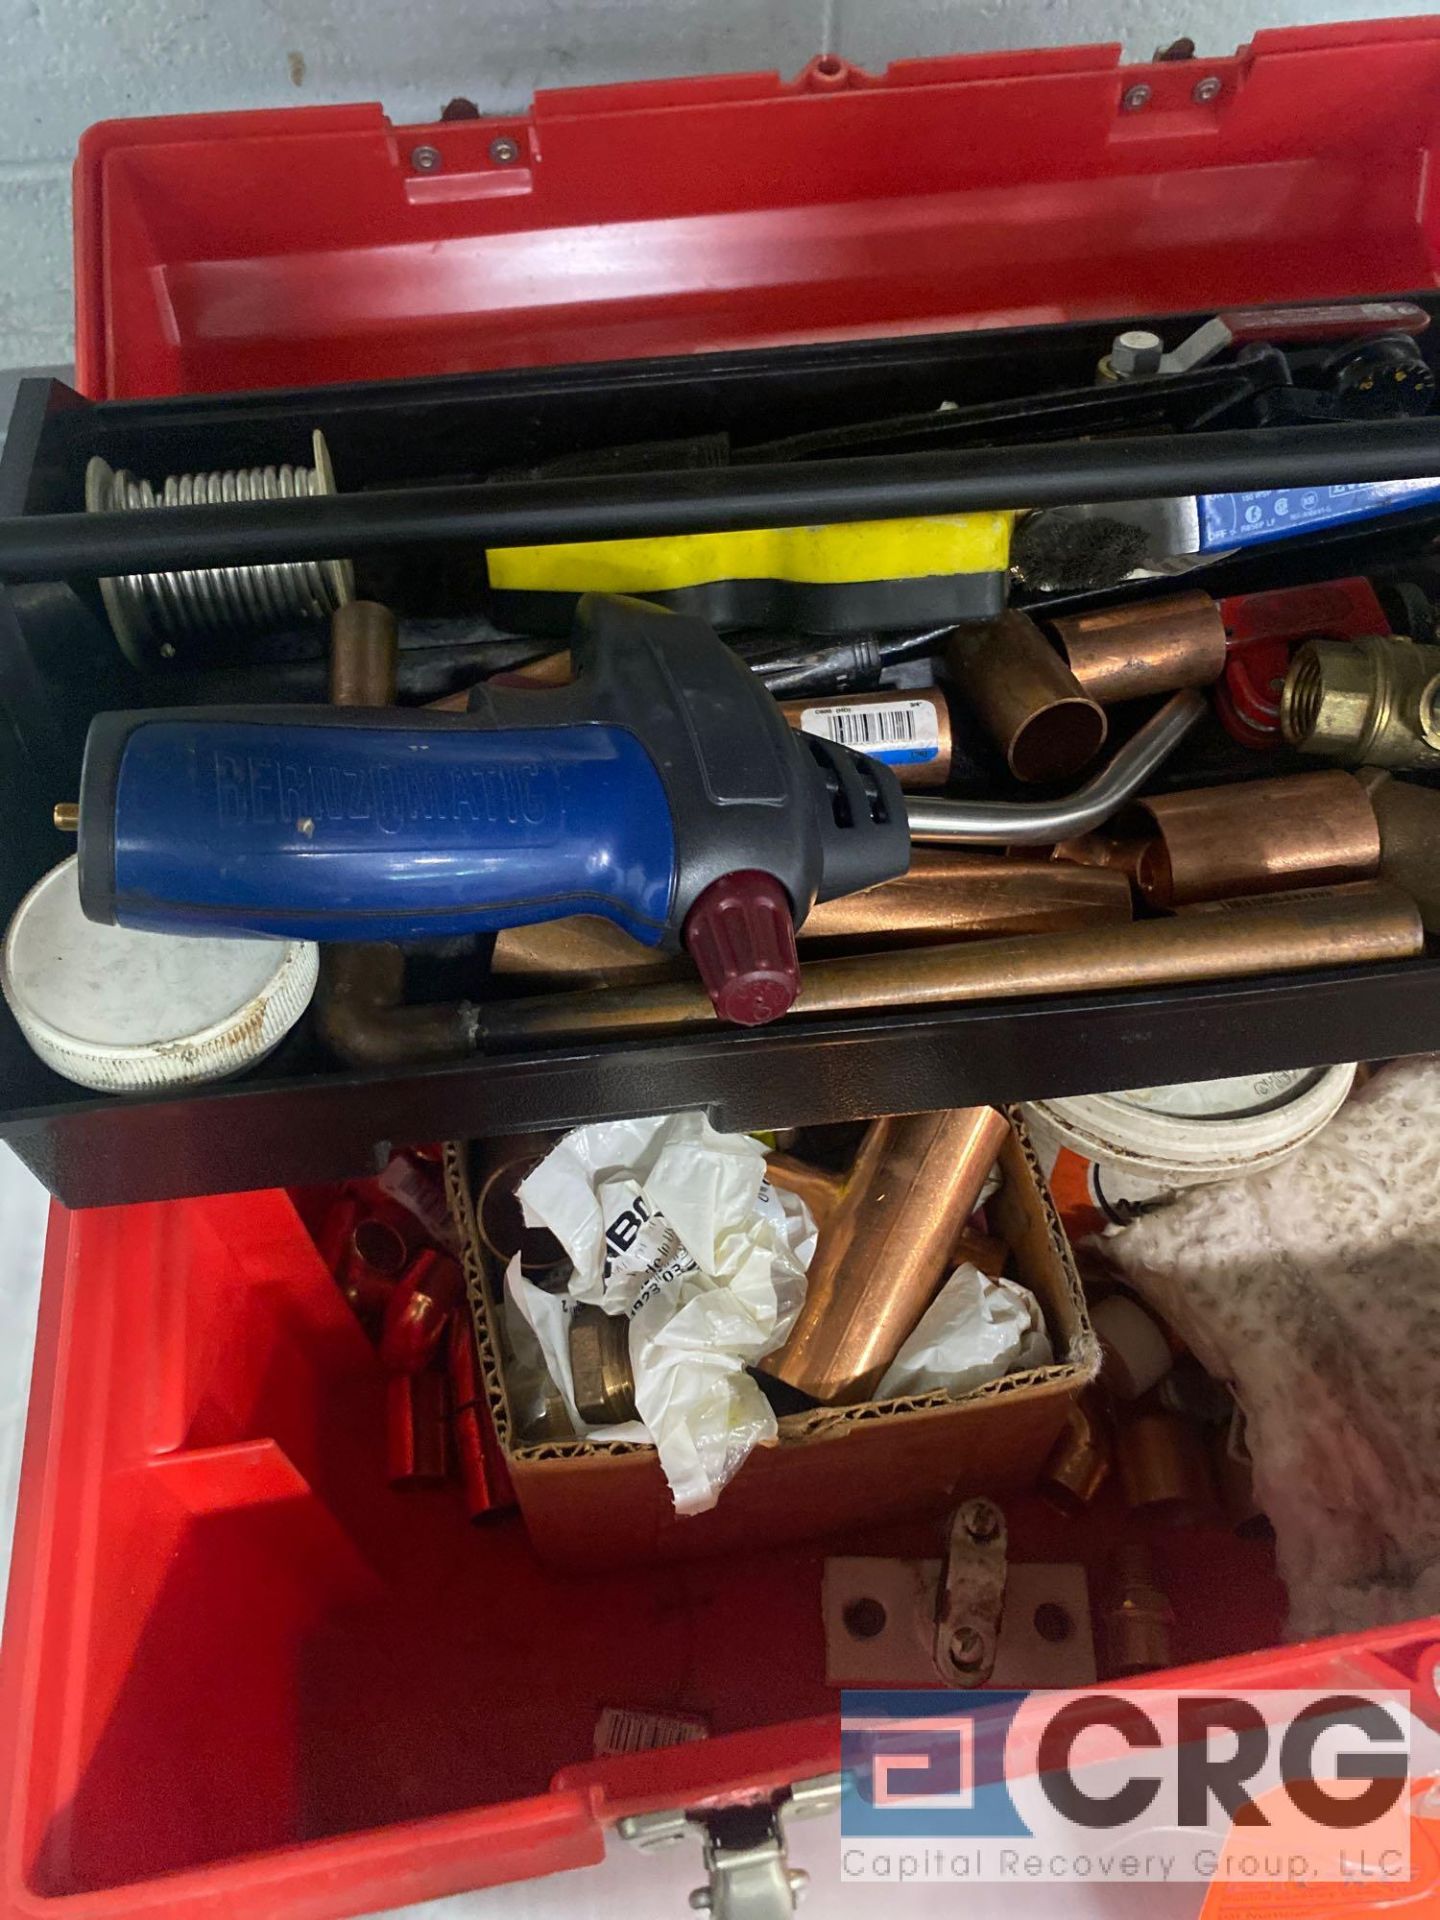 Plumbers tool box with assorted plumbing tools, pieces and materials, including bernzomatic torch - Image 2 of 5